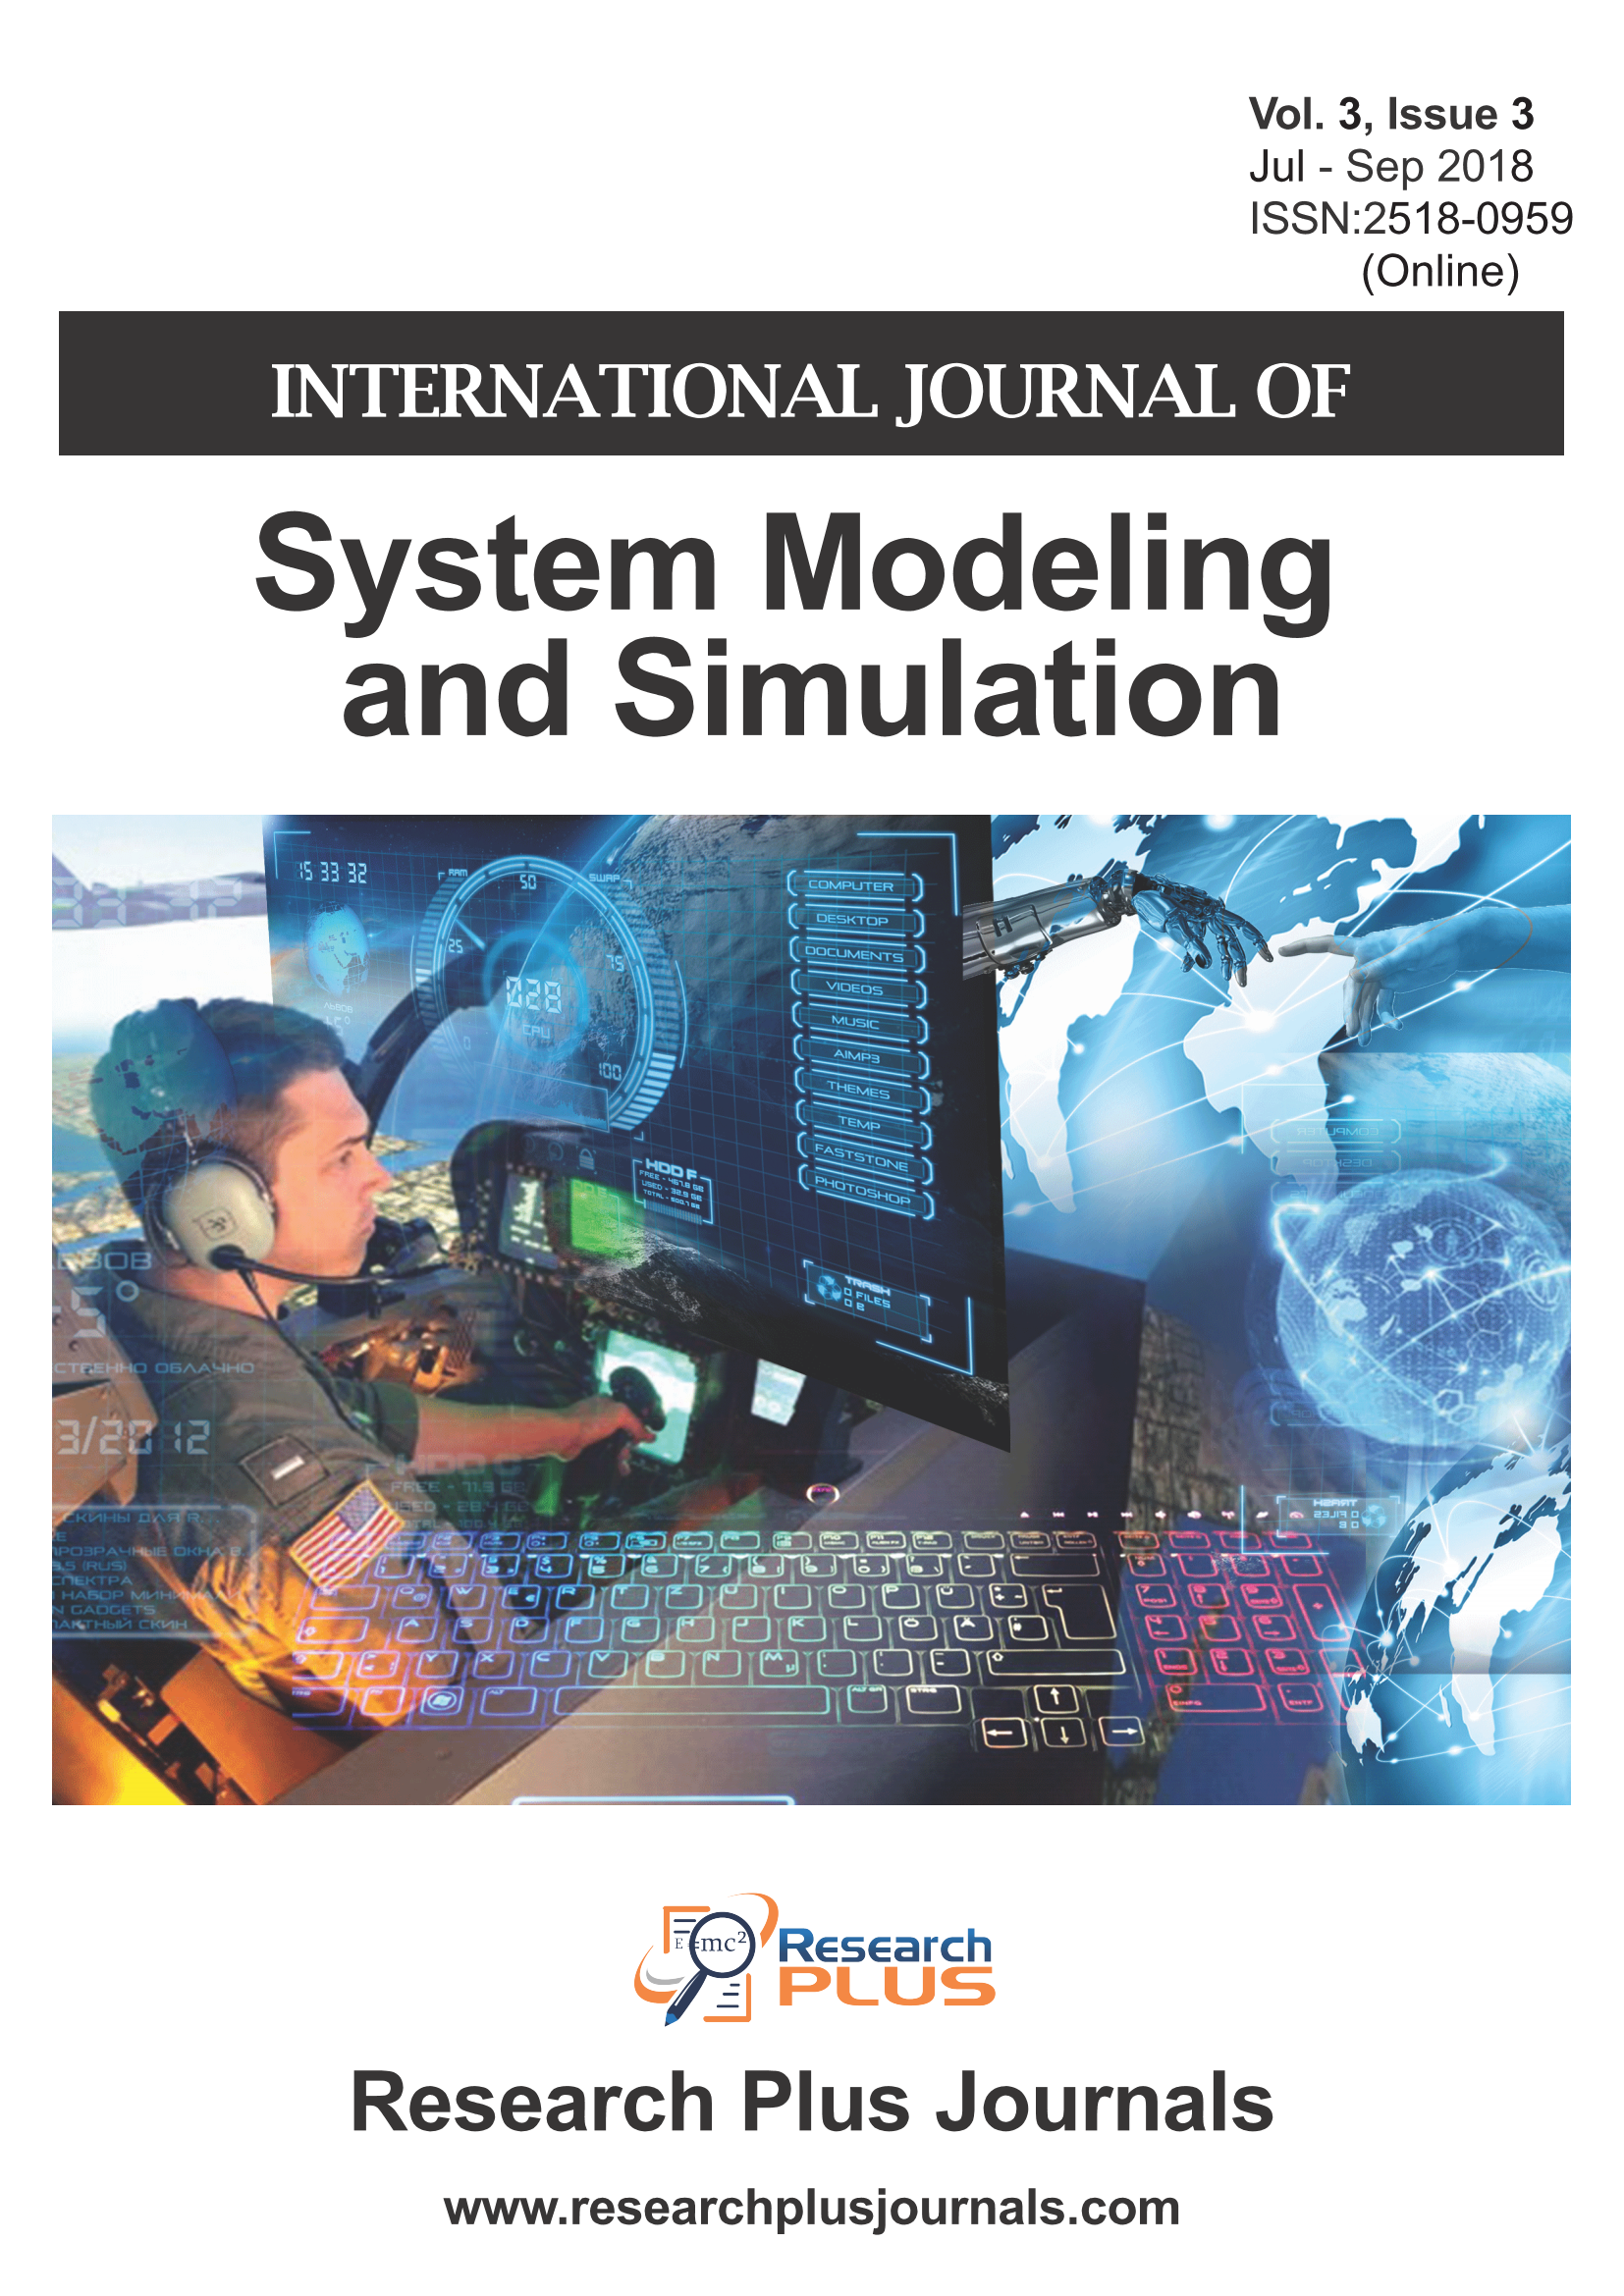 Volume 3, Issue 3, International Journal of System Modeling and Simulation (IJSMS)  (Online ISSN: 2518-0959)